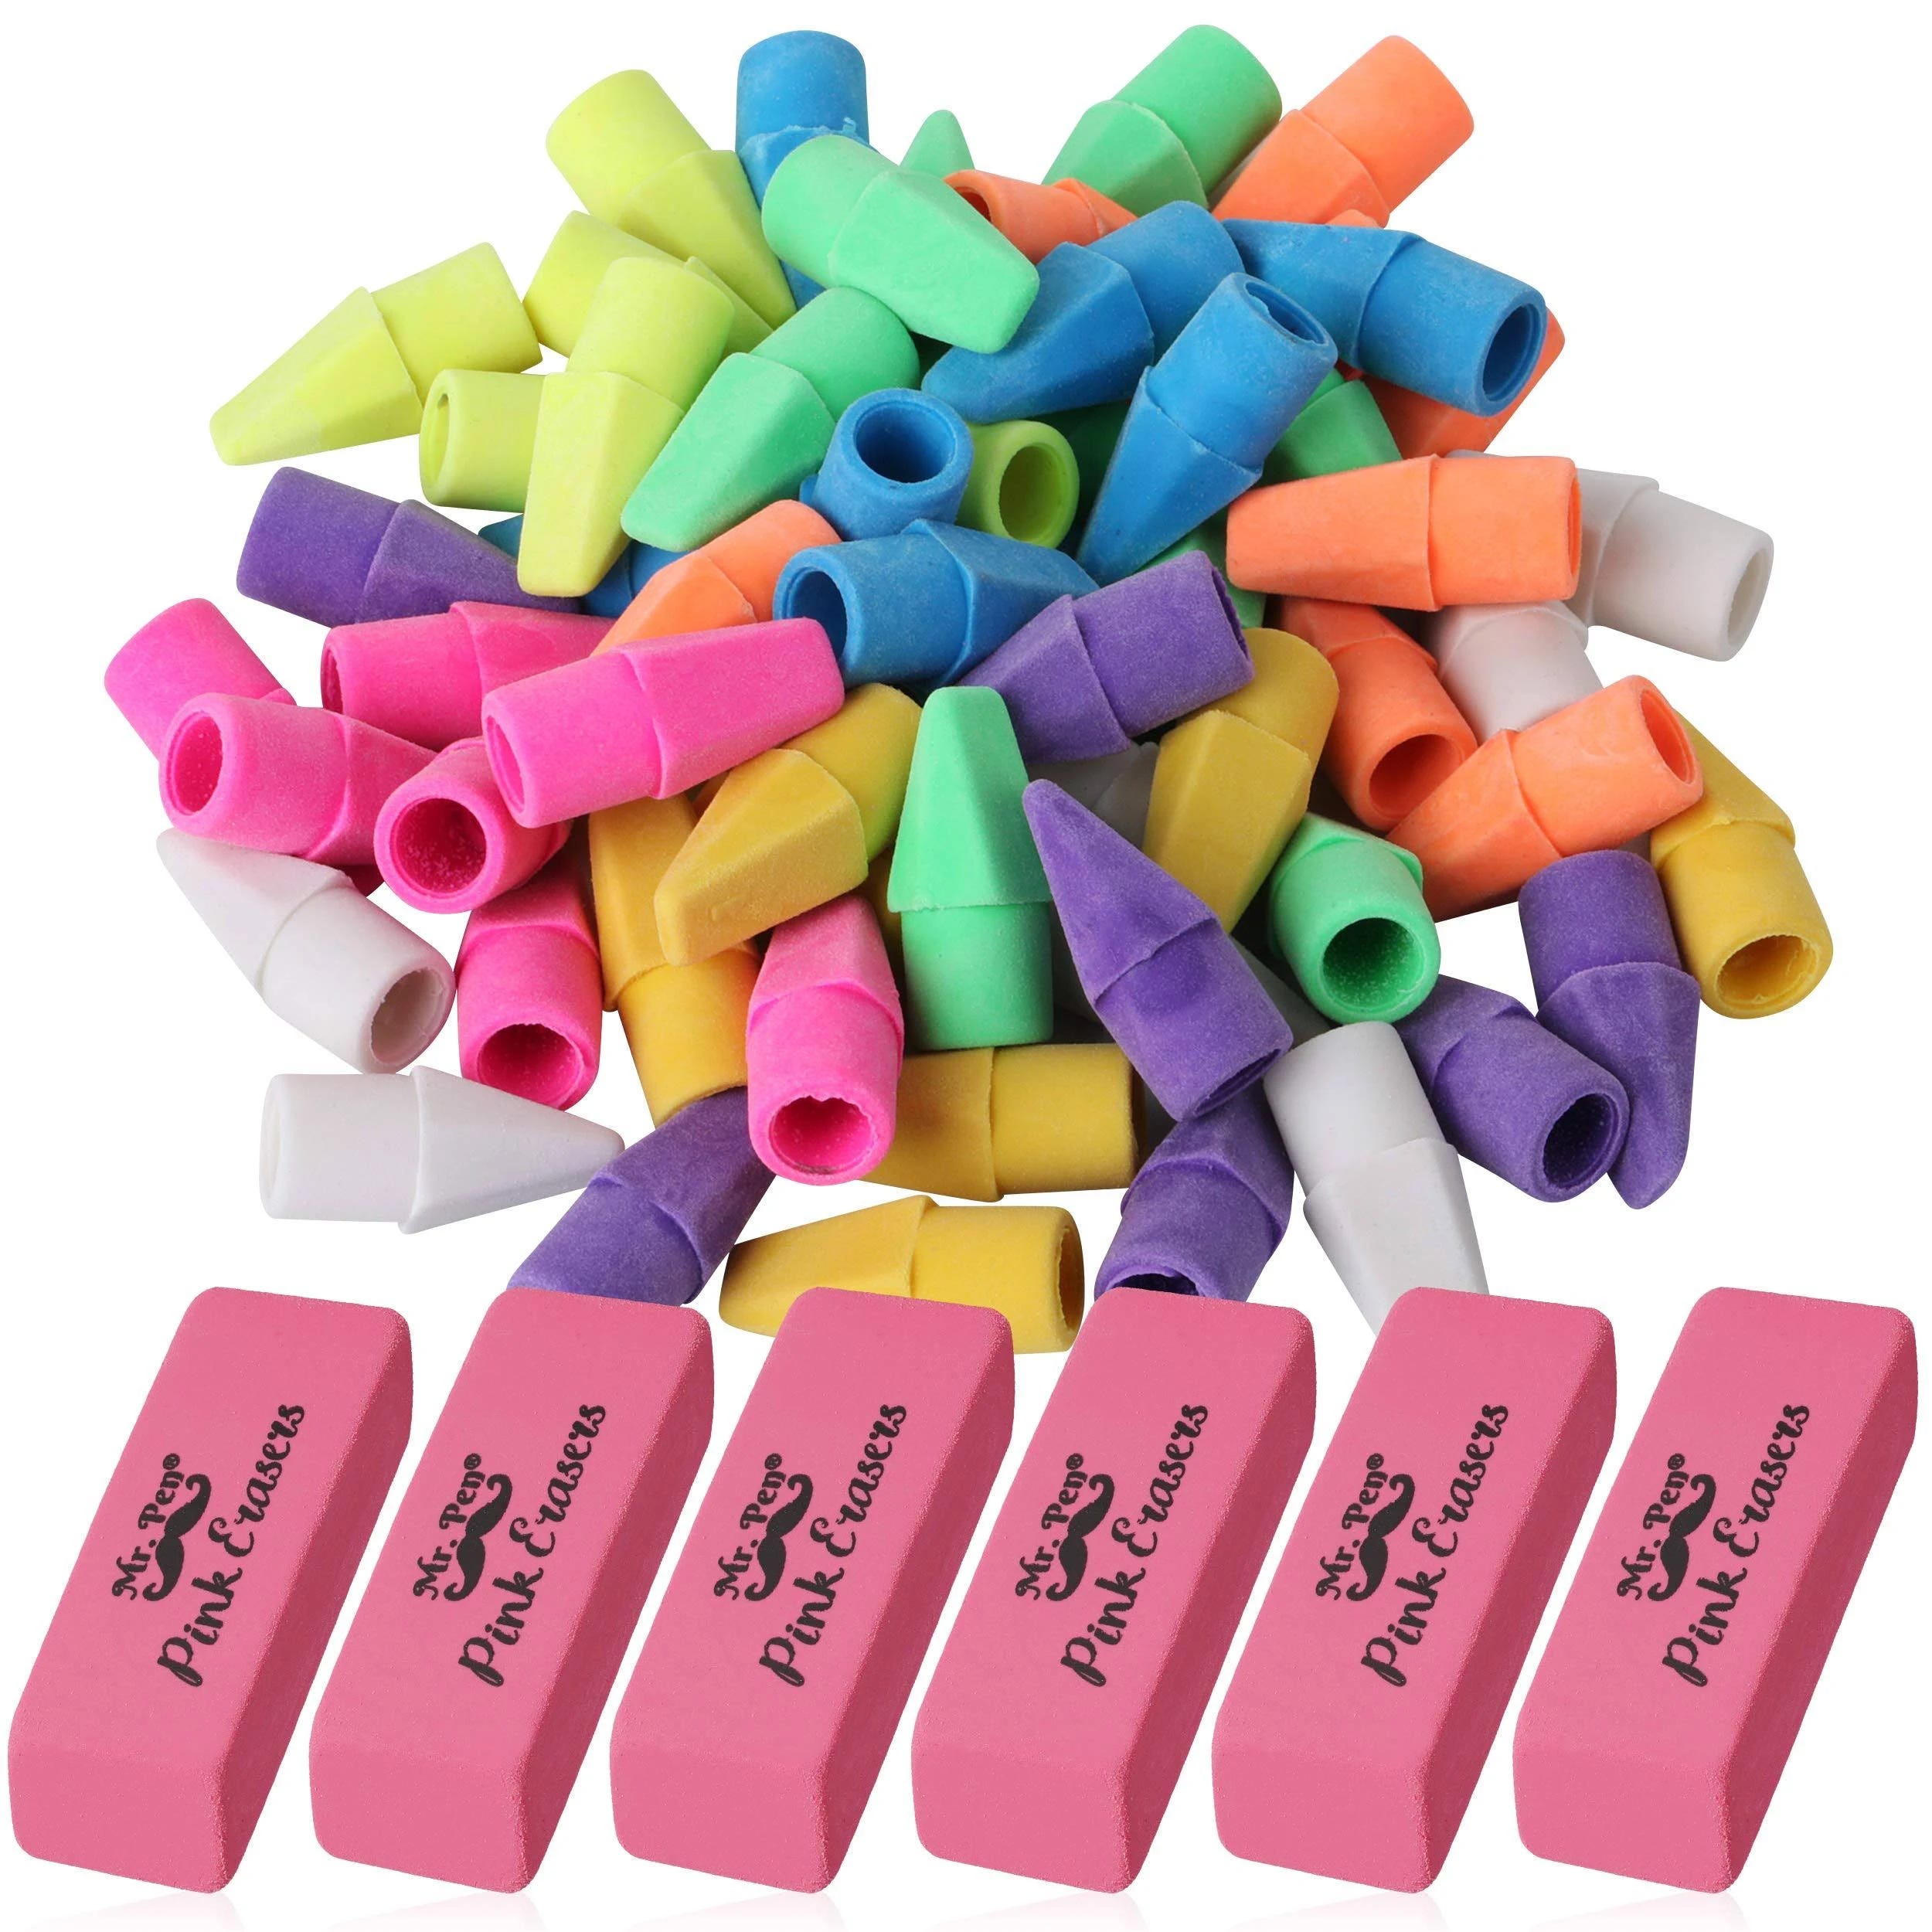 Colorful Pencil Eraser Set - Latex-Free Erasers for School and Home Use | Image